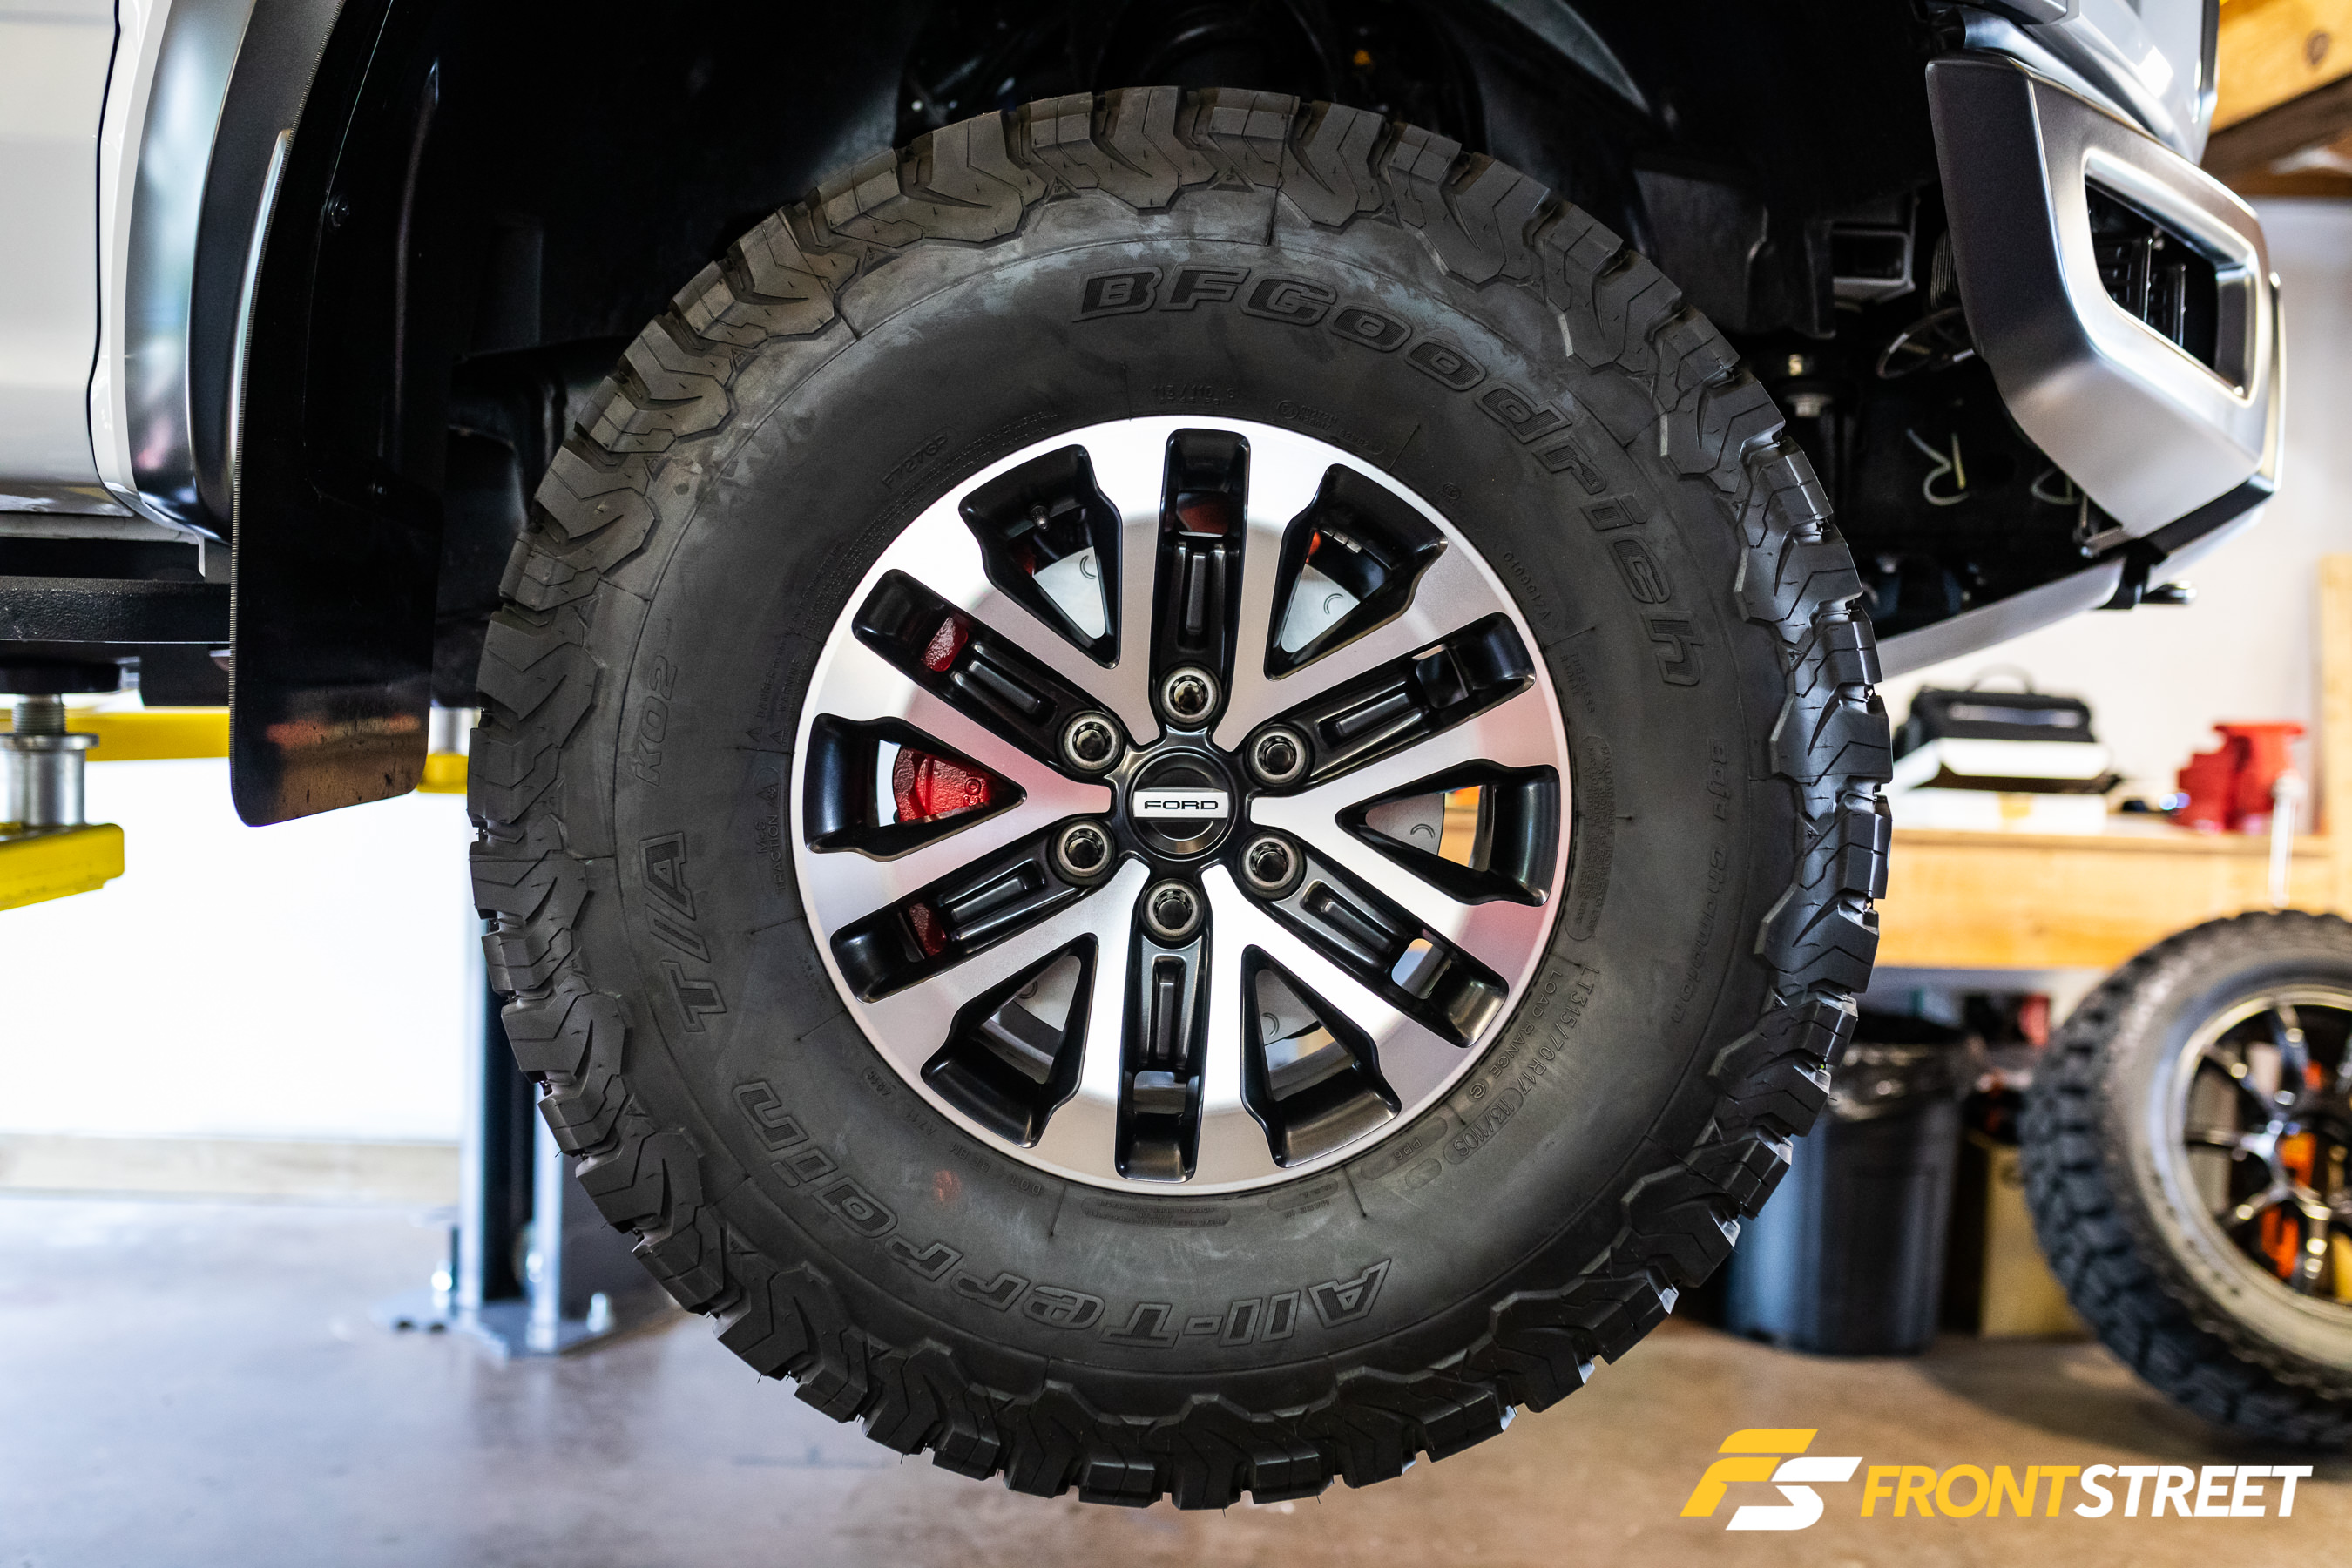 Big Brakes For A Big Beast: Alcon Components And The F-150 Raptor